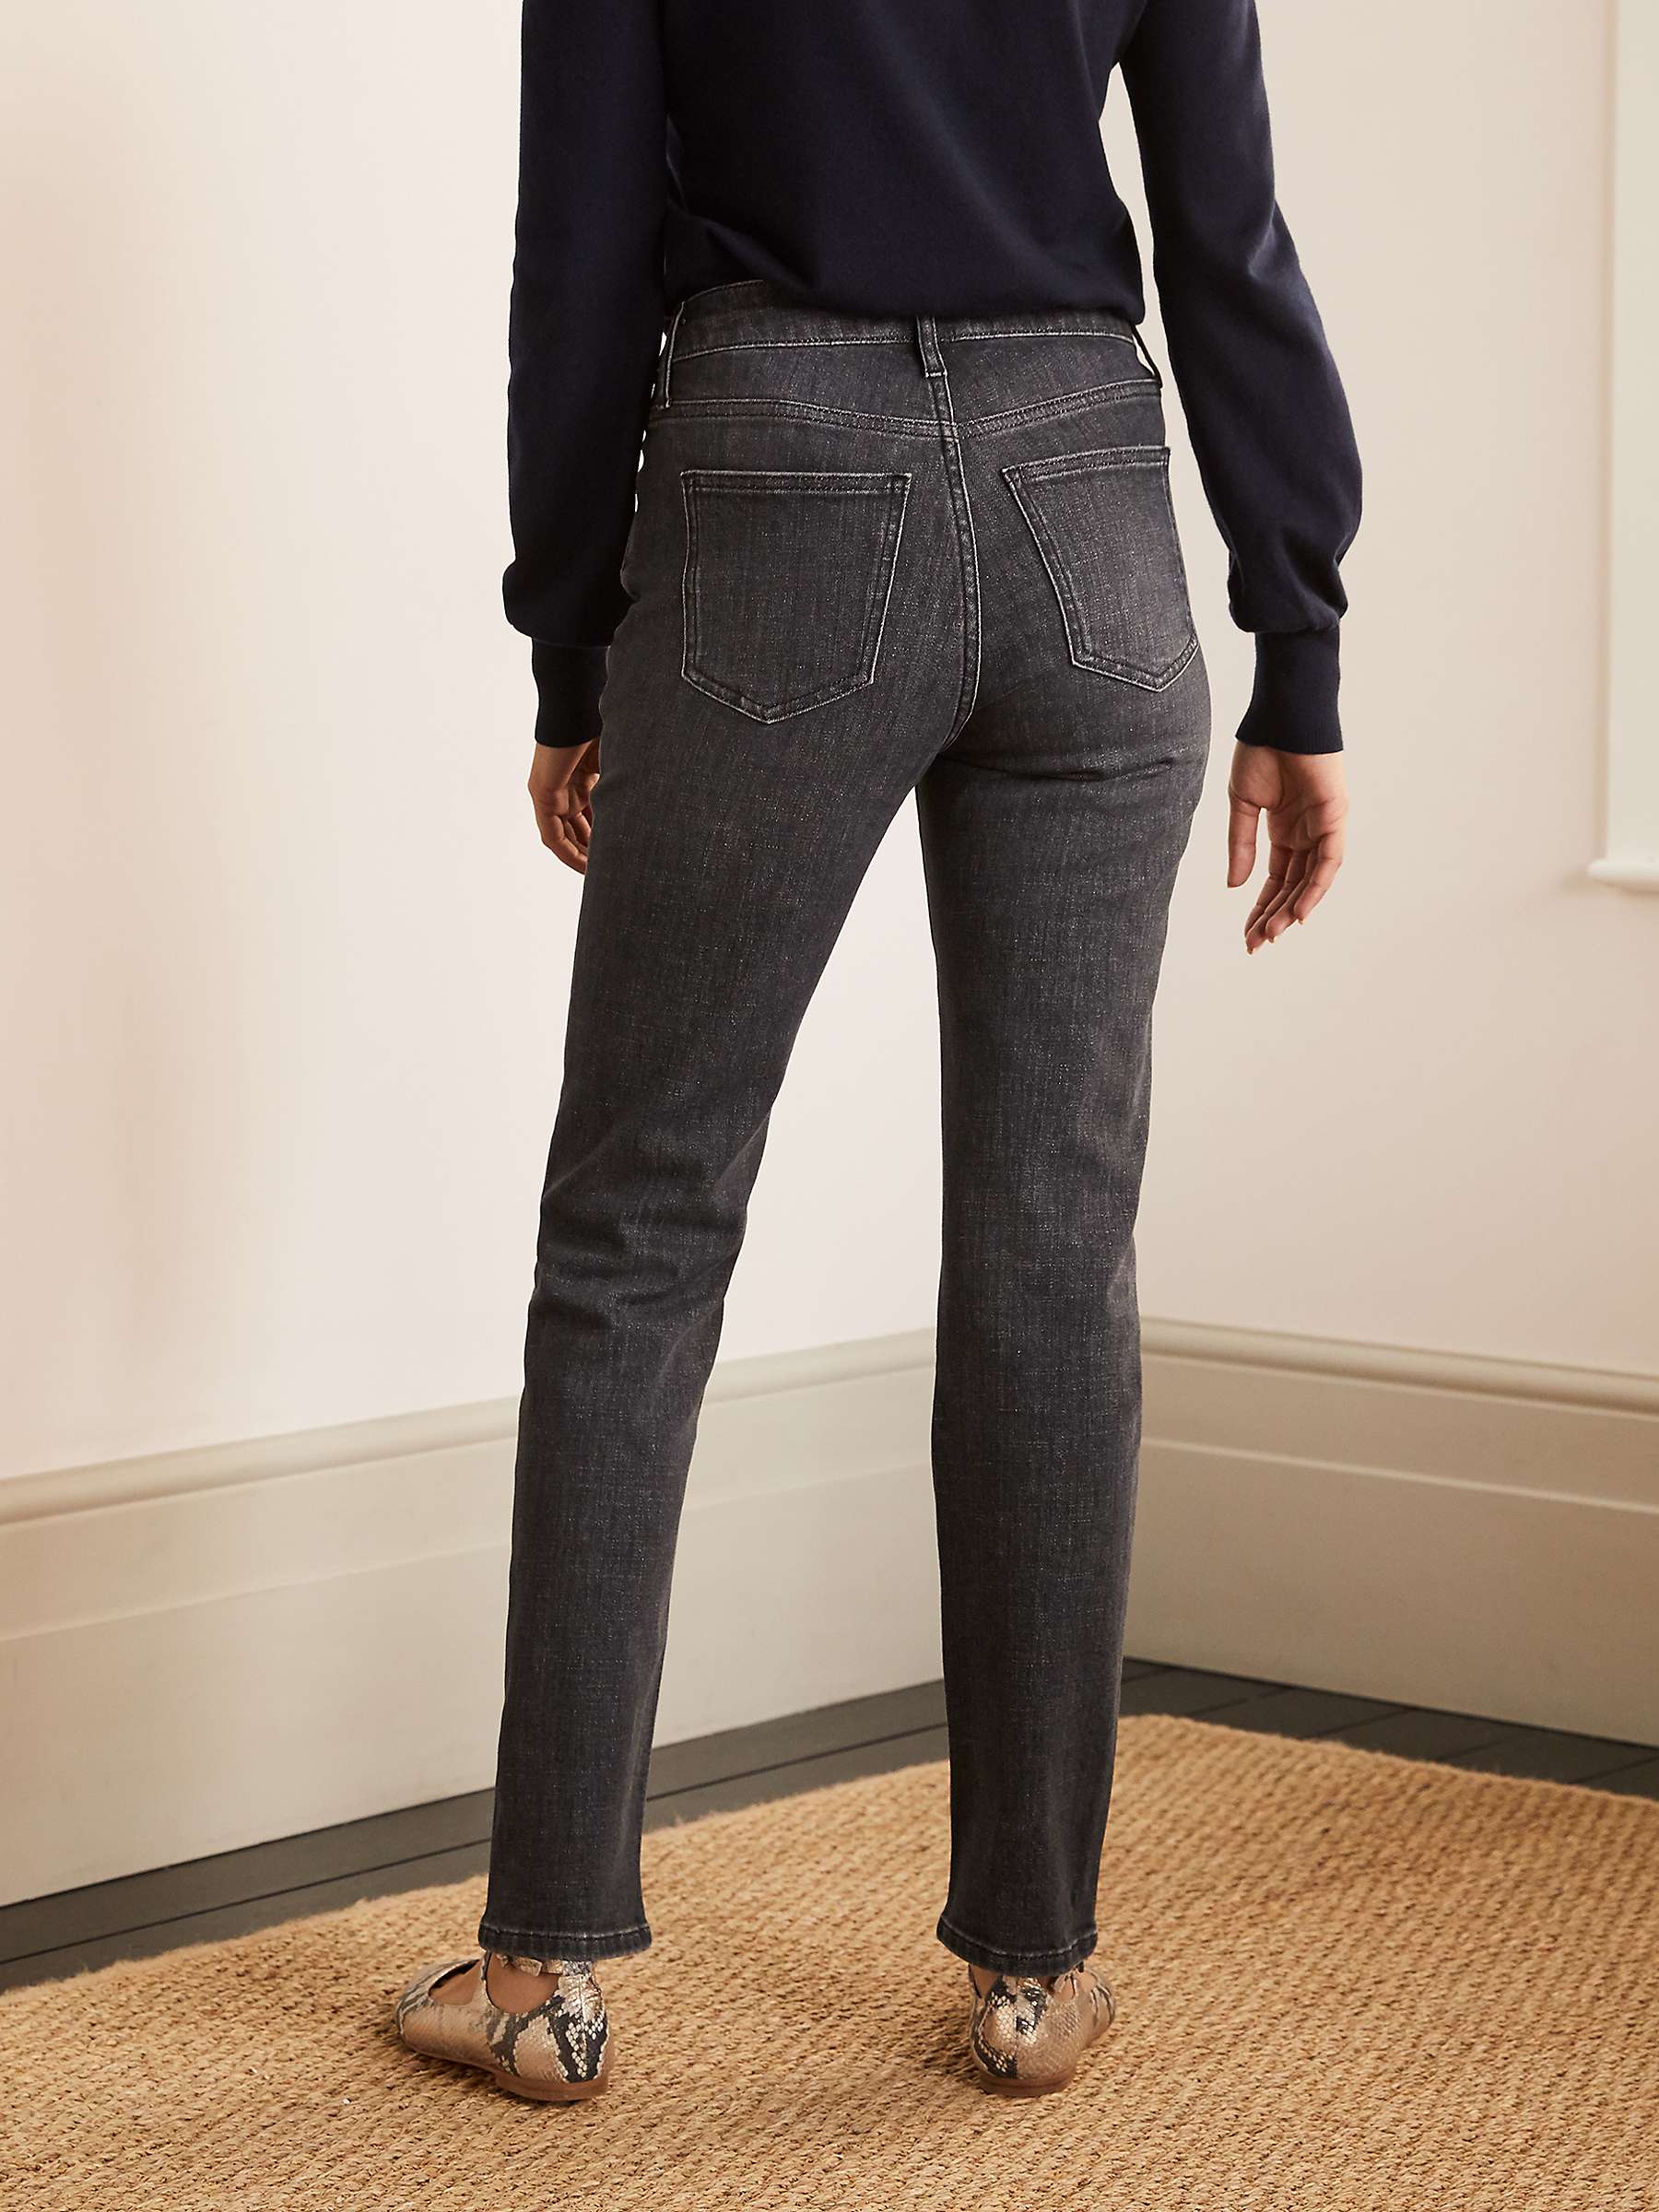 Buy Boden Slim Straight Jeans, Authentic Grey Online at johnlewis.com